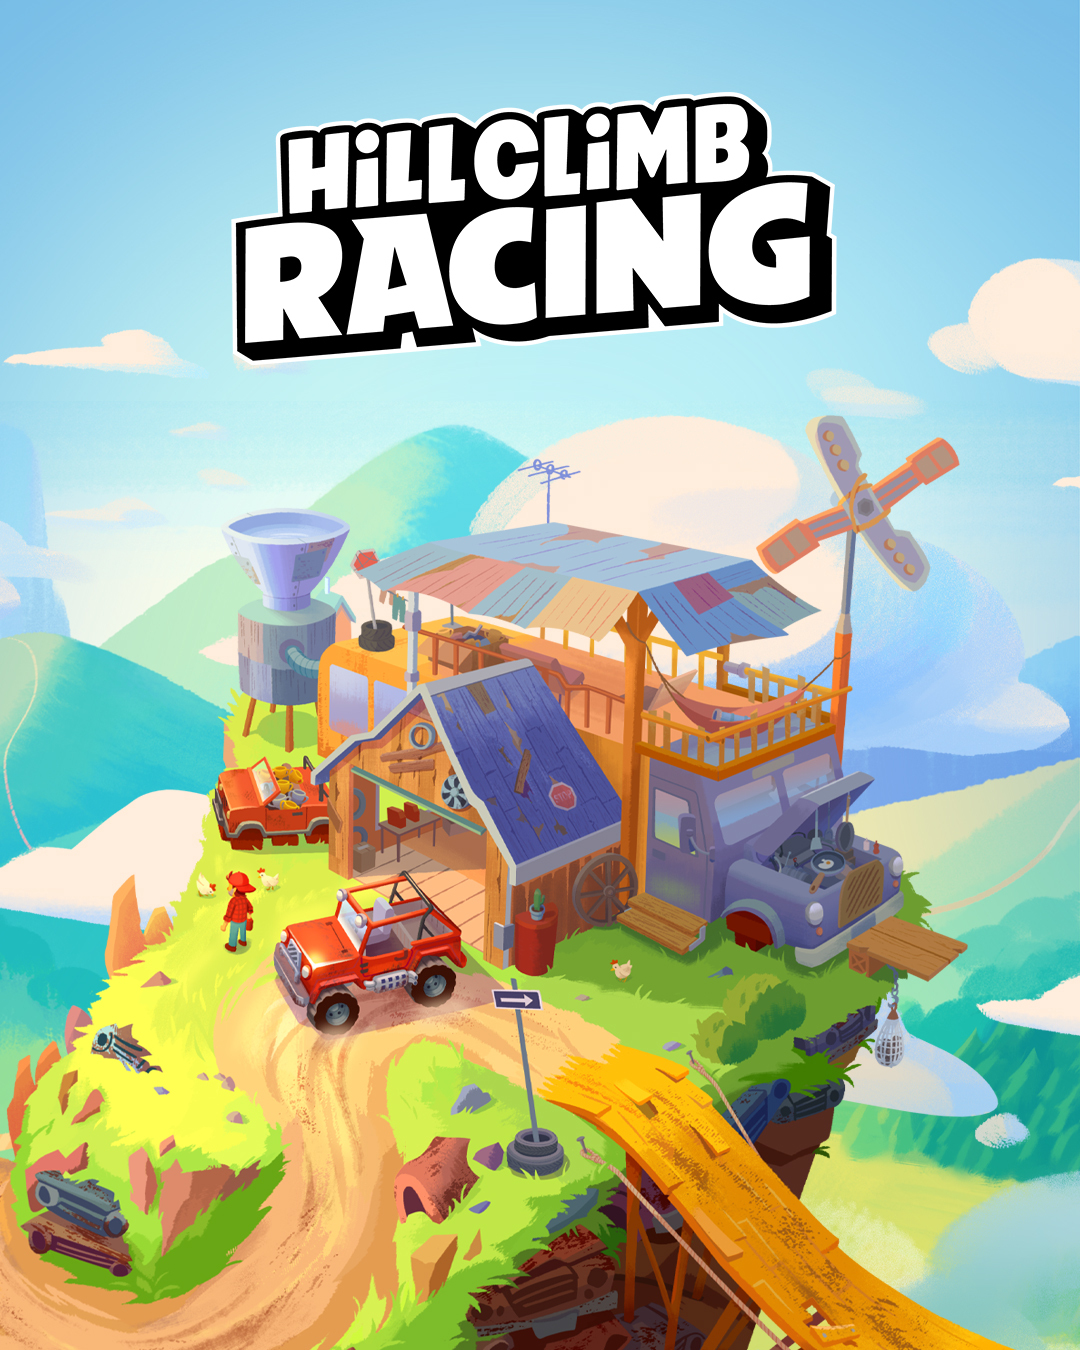 Fingersoft and Hill Climb Racing turn 10 – The hit game attracted over 220  million new players last year - Miltton